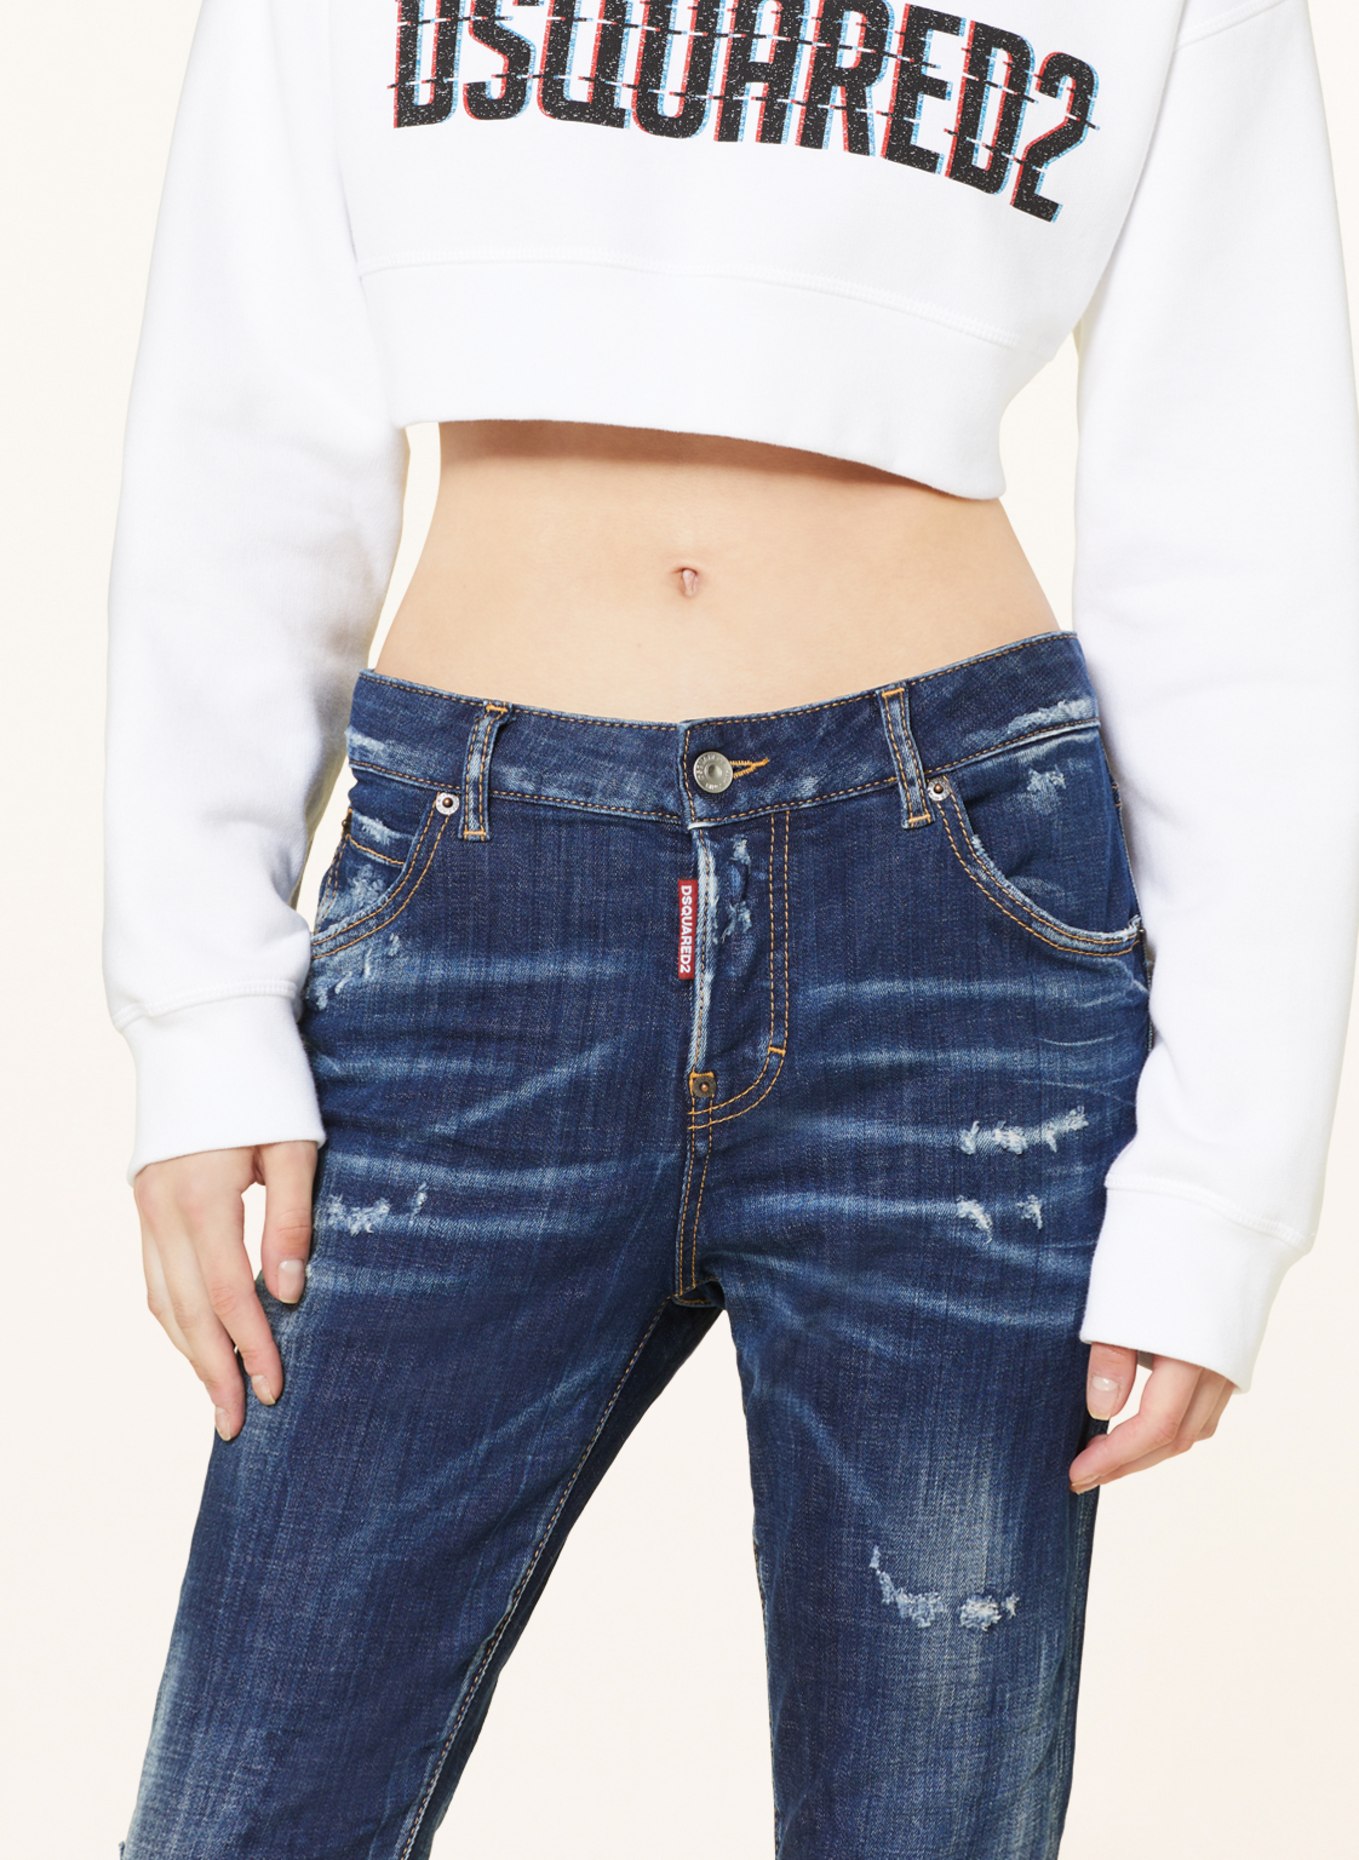 DSQUARED2 7/8-Jeans COOL GIRL, Farbe: 470 NAVY BLUE (Bild 5)